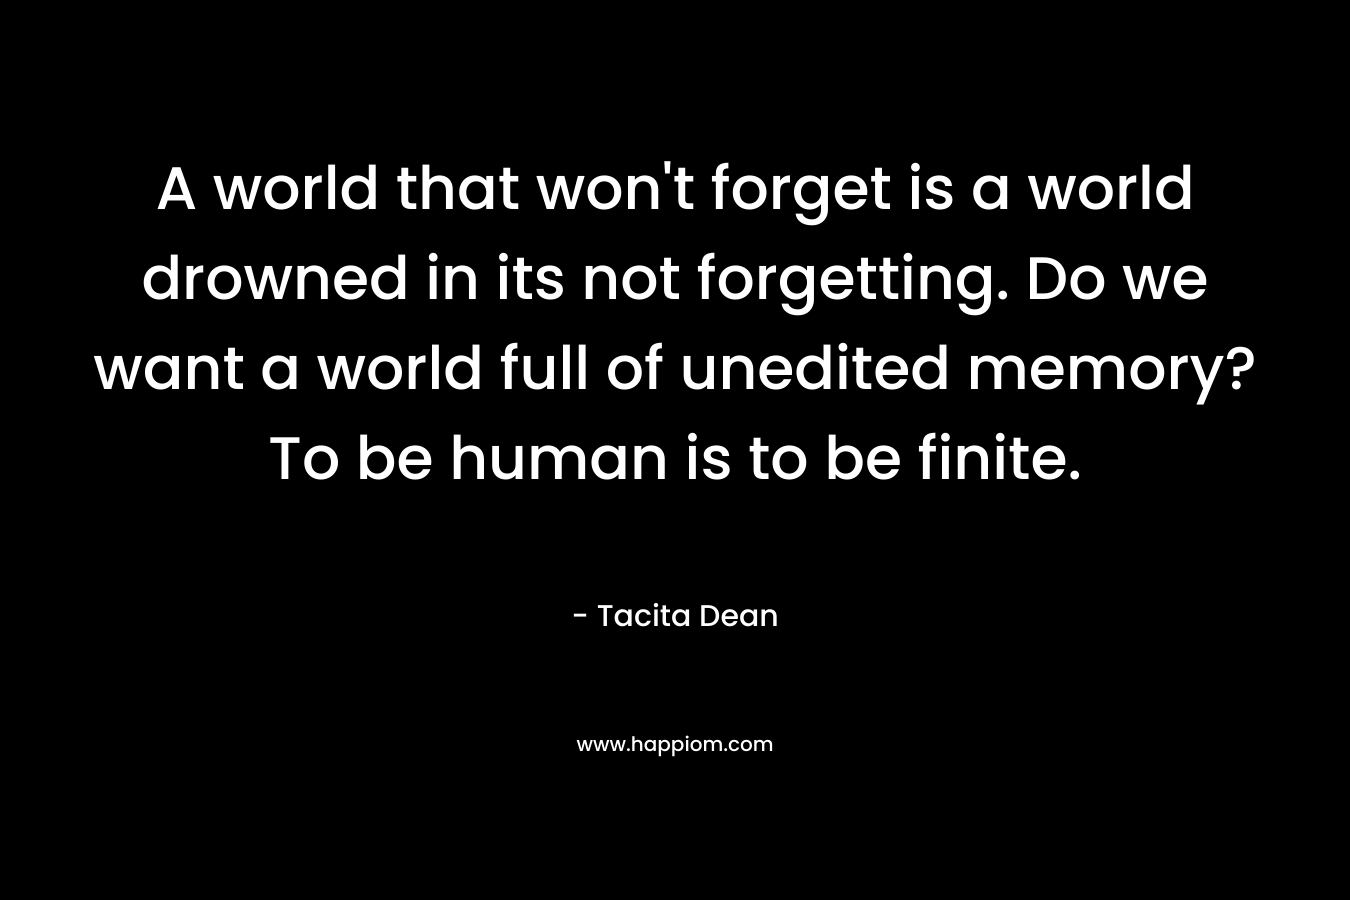 A world that won't forget is a world drowned in its not forgetting. Do we want a world full of unedited memory? To be human is to be finite.